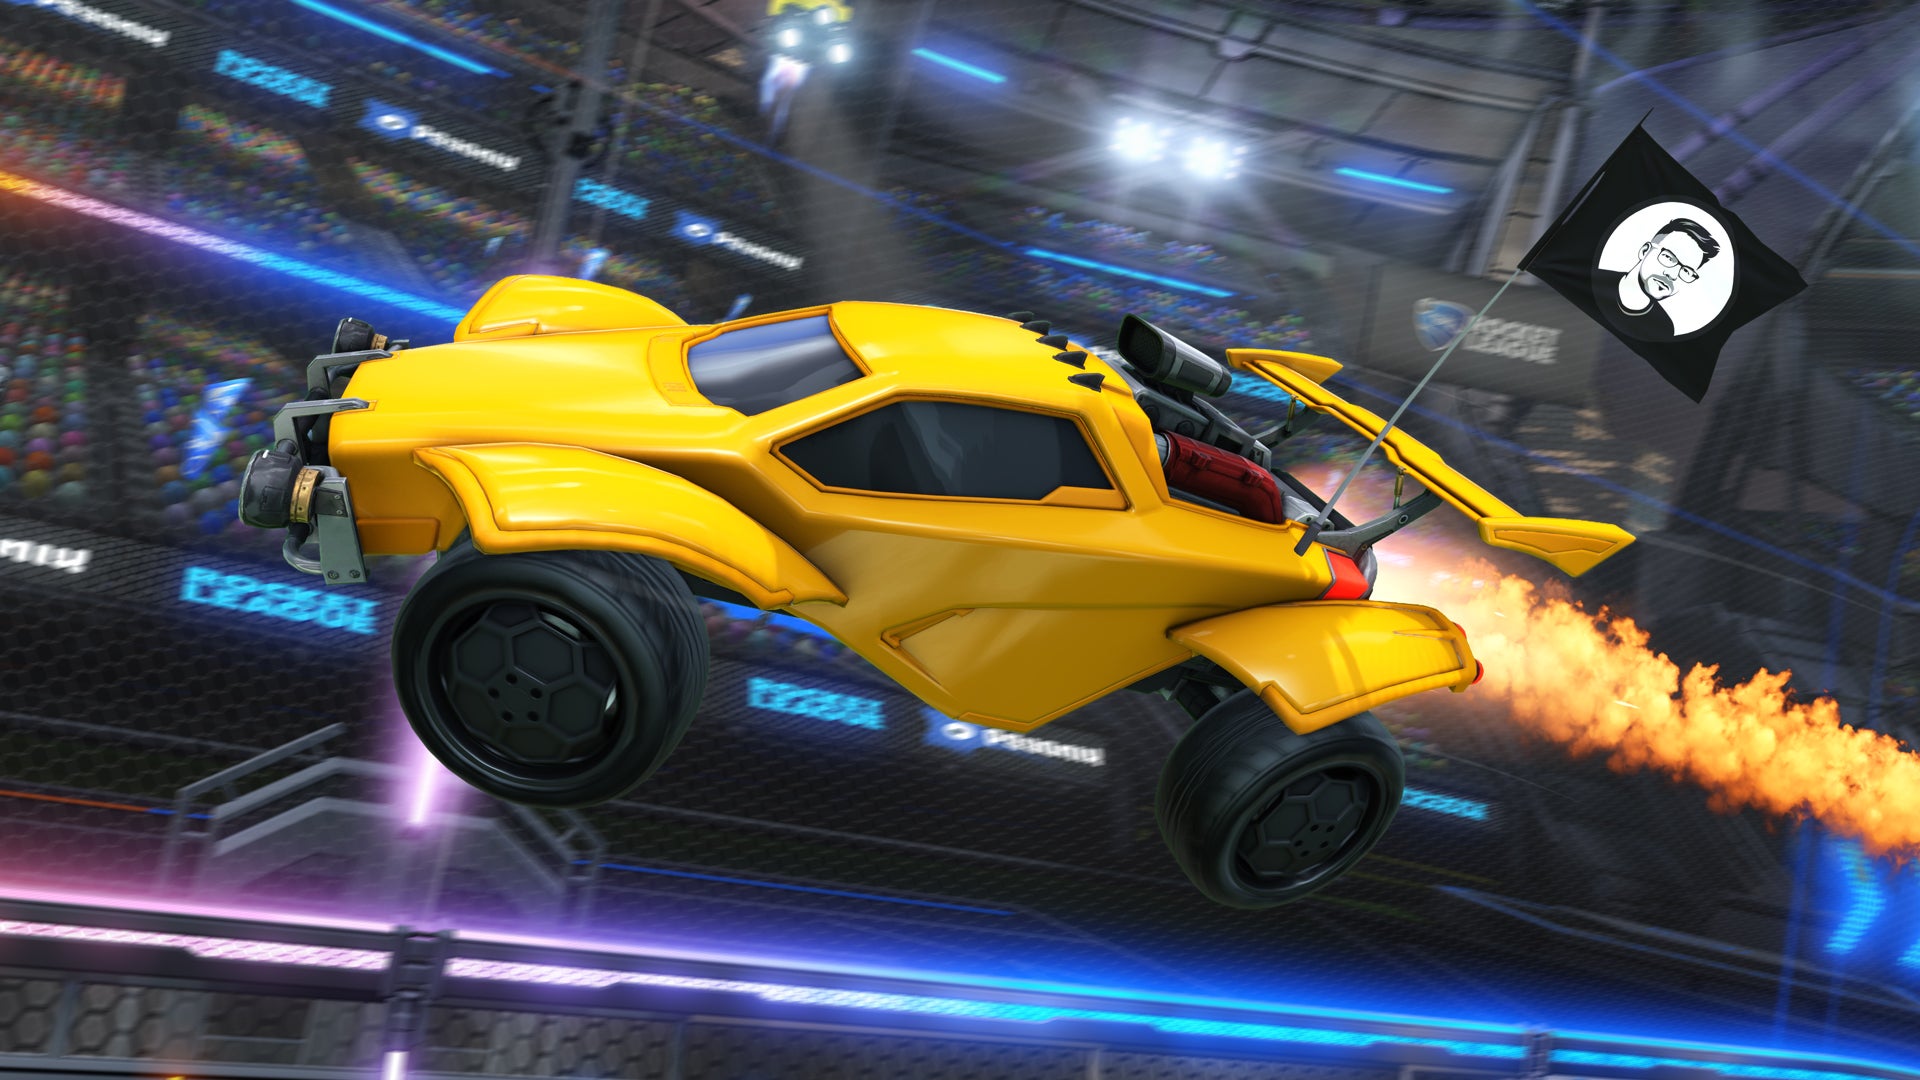 New Community Flags Coming To Rocket League Image